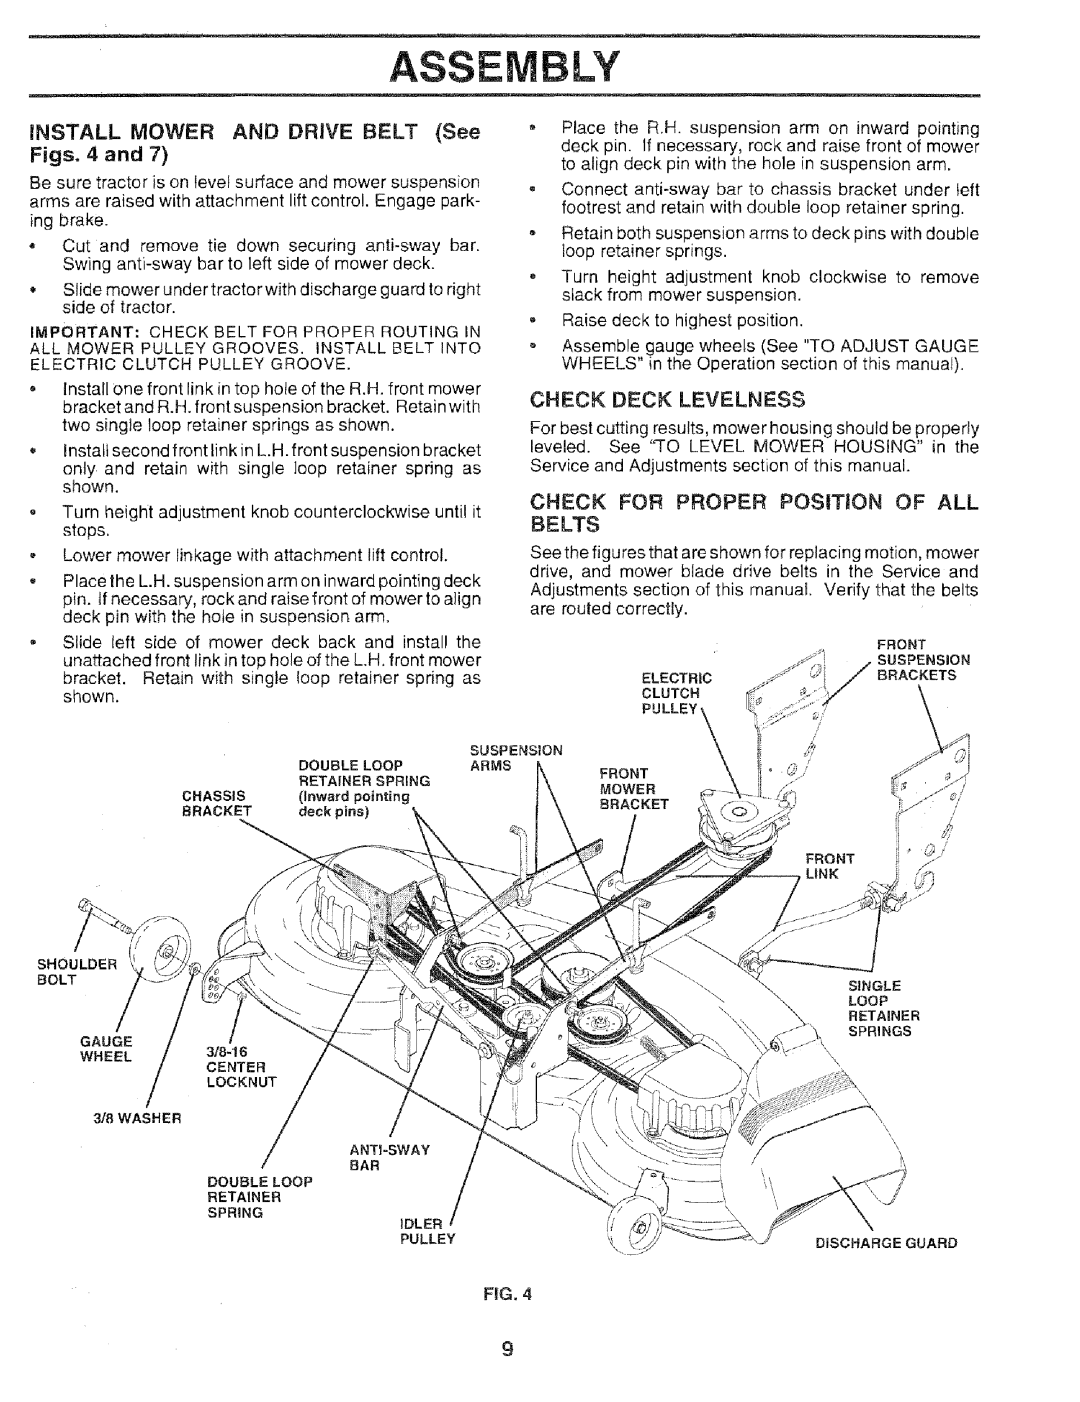 Sears 917.25051 manual Assembly, INSTALL MOWER AND DRIVE BELT See, Figs. 4 and, Check Deck Levelness 